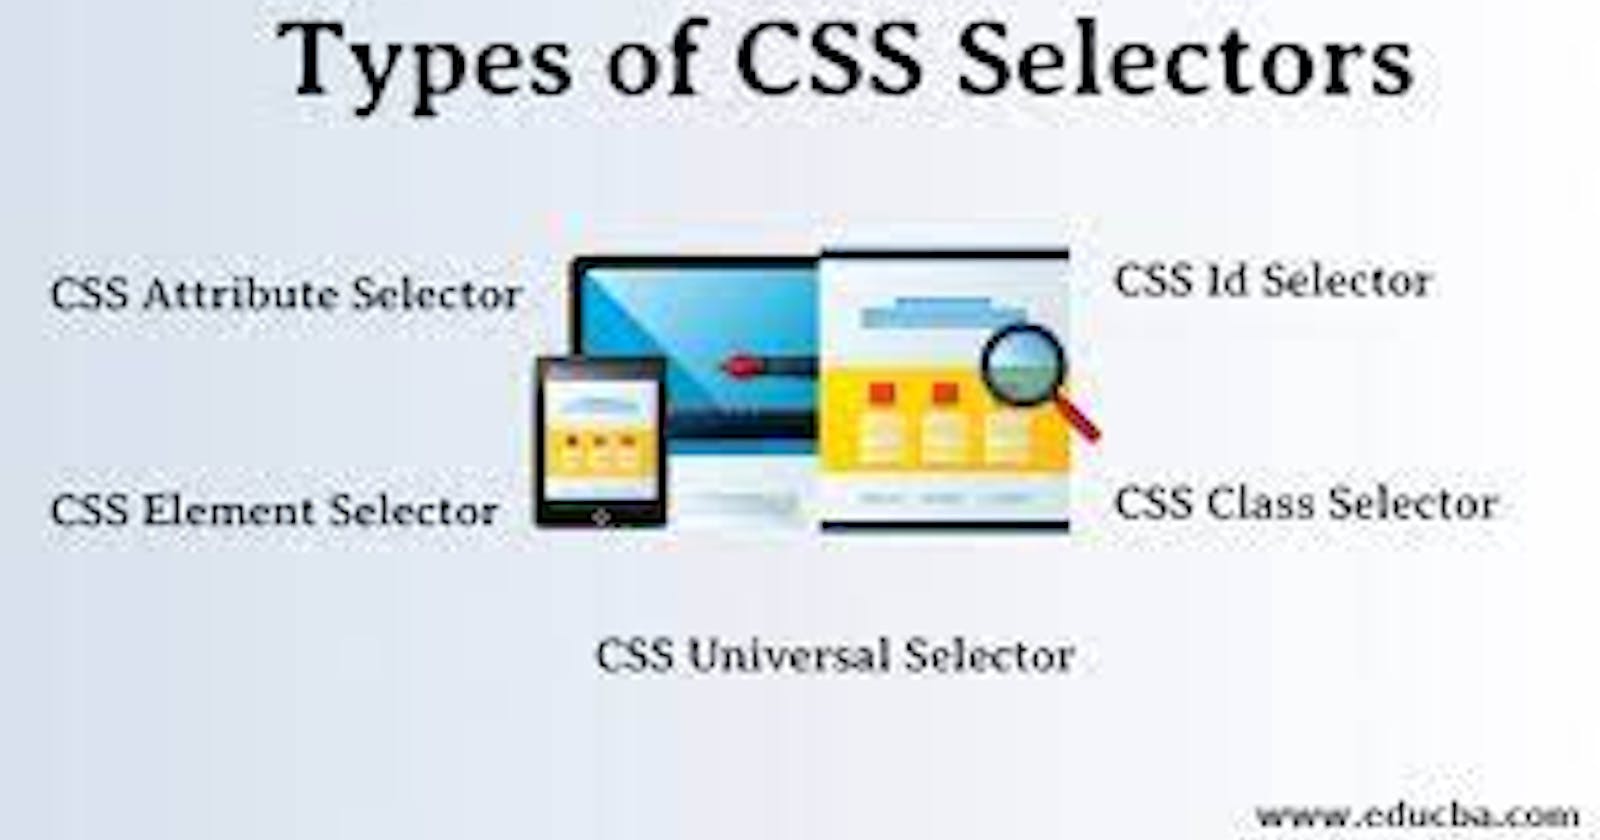 Lets start with basic CSS & selectors....